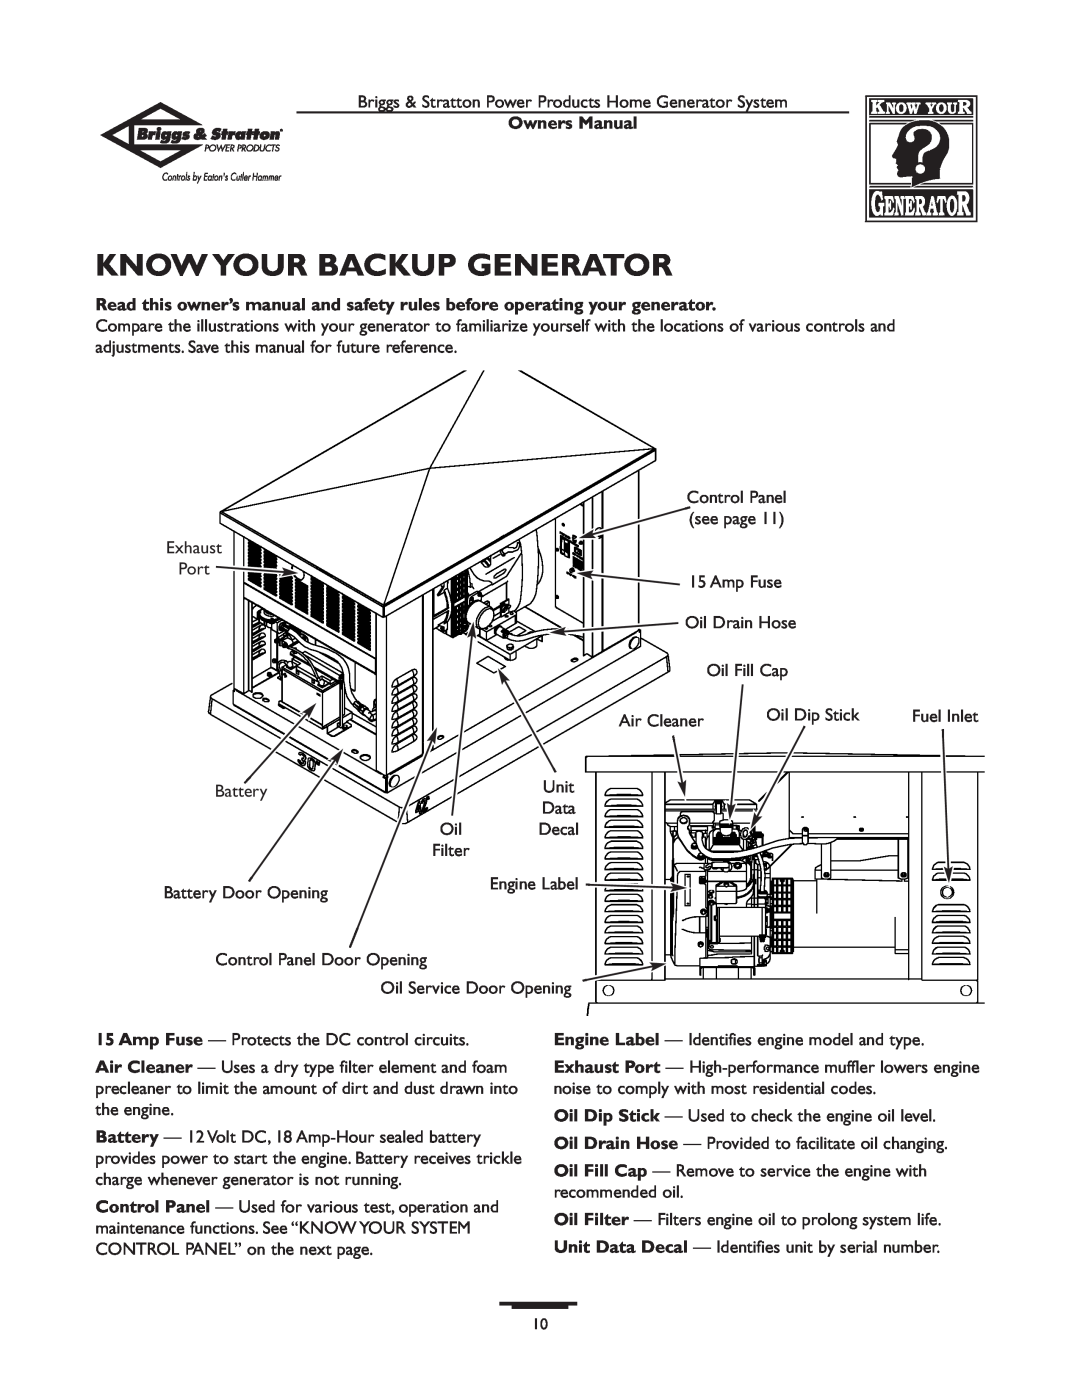 Briggs & Stratton 1679-0 owner manual Know Your Backup Generator, Owners Manual 